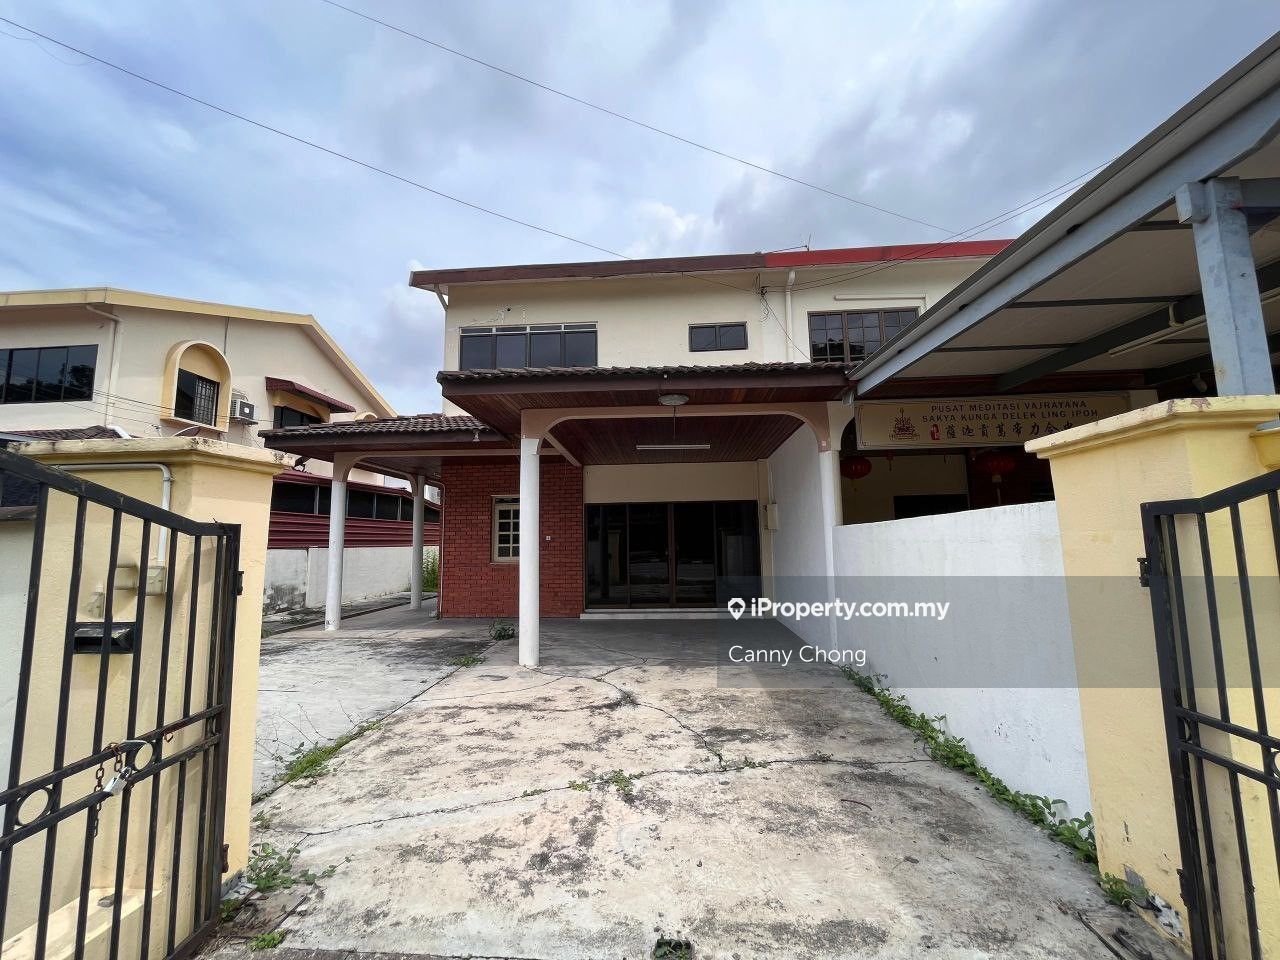 Partially Furnished 2 Storey Semi-D House In Taman Mansion For Rent